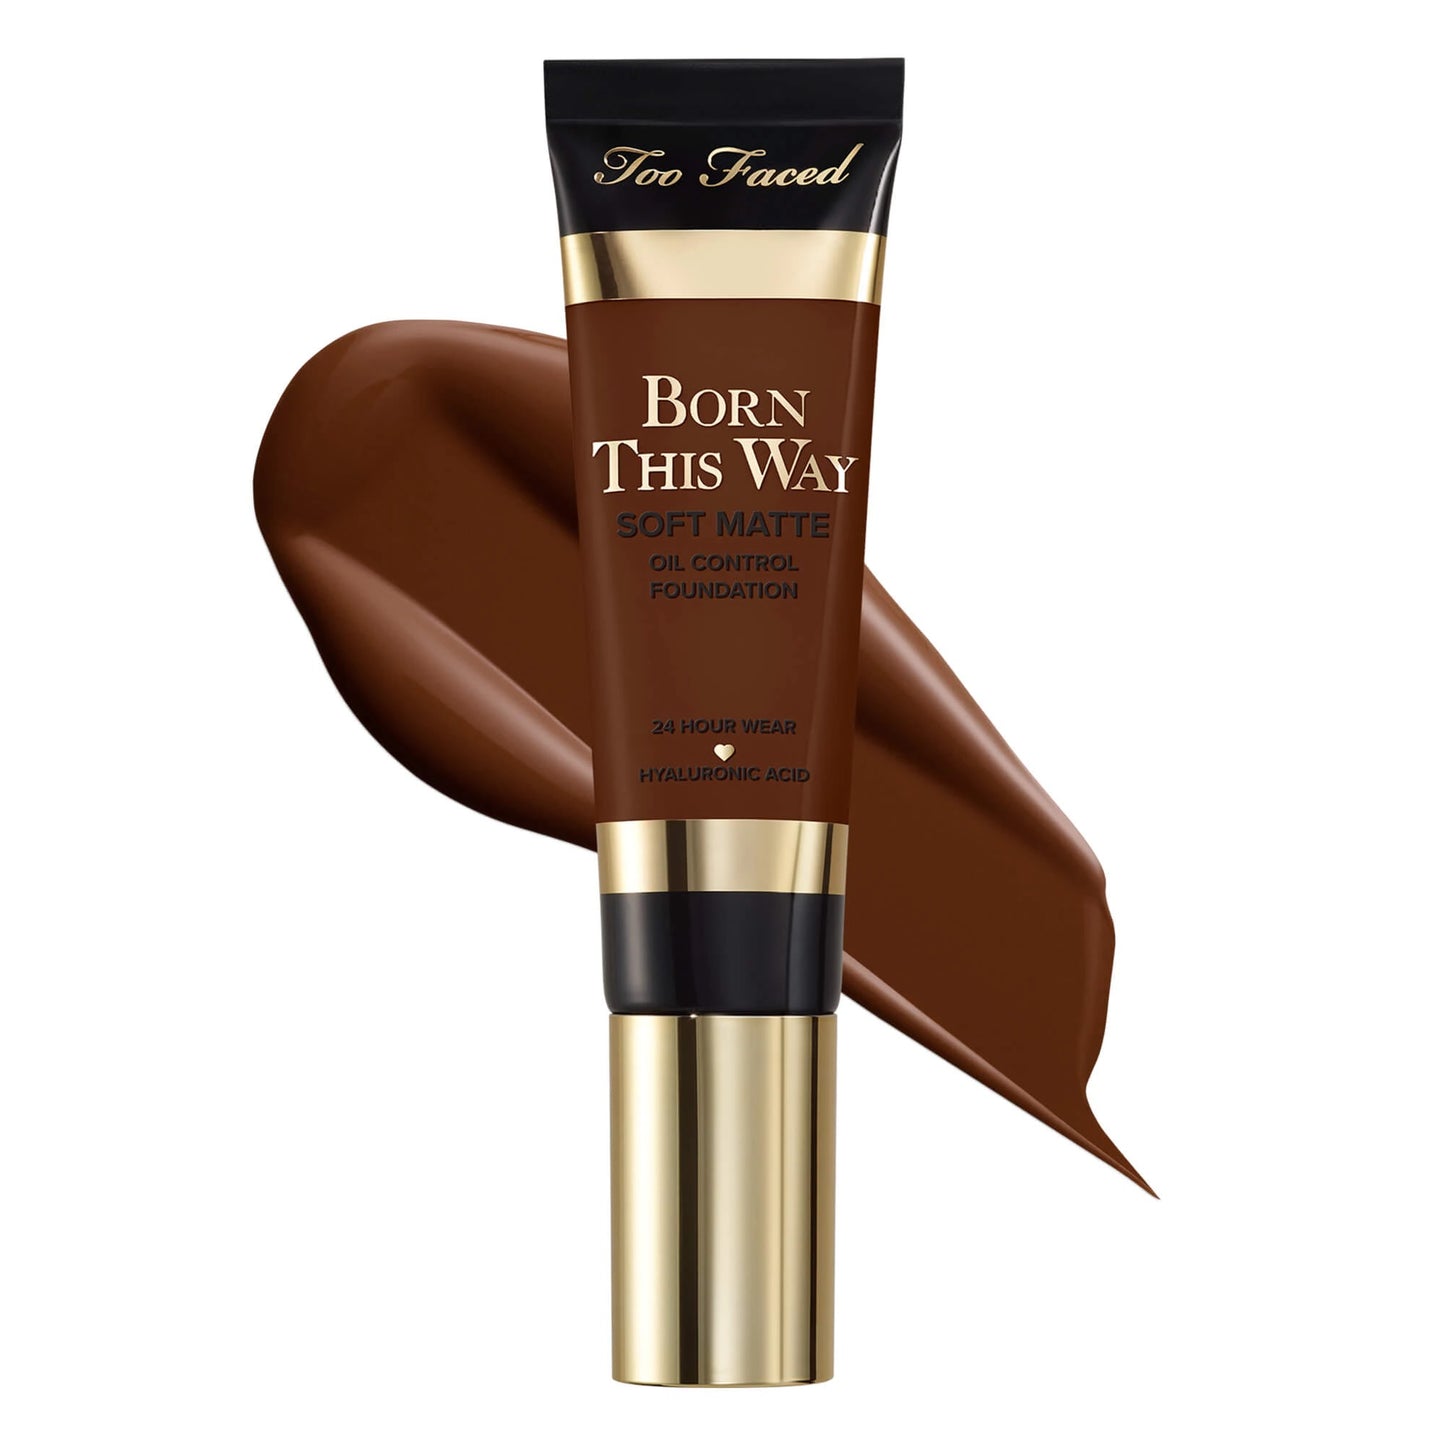 Too Faced Born This Way Soft Matte Foundation 30ml - Truffle